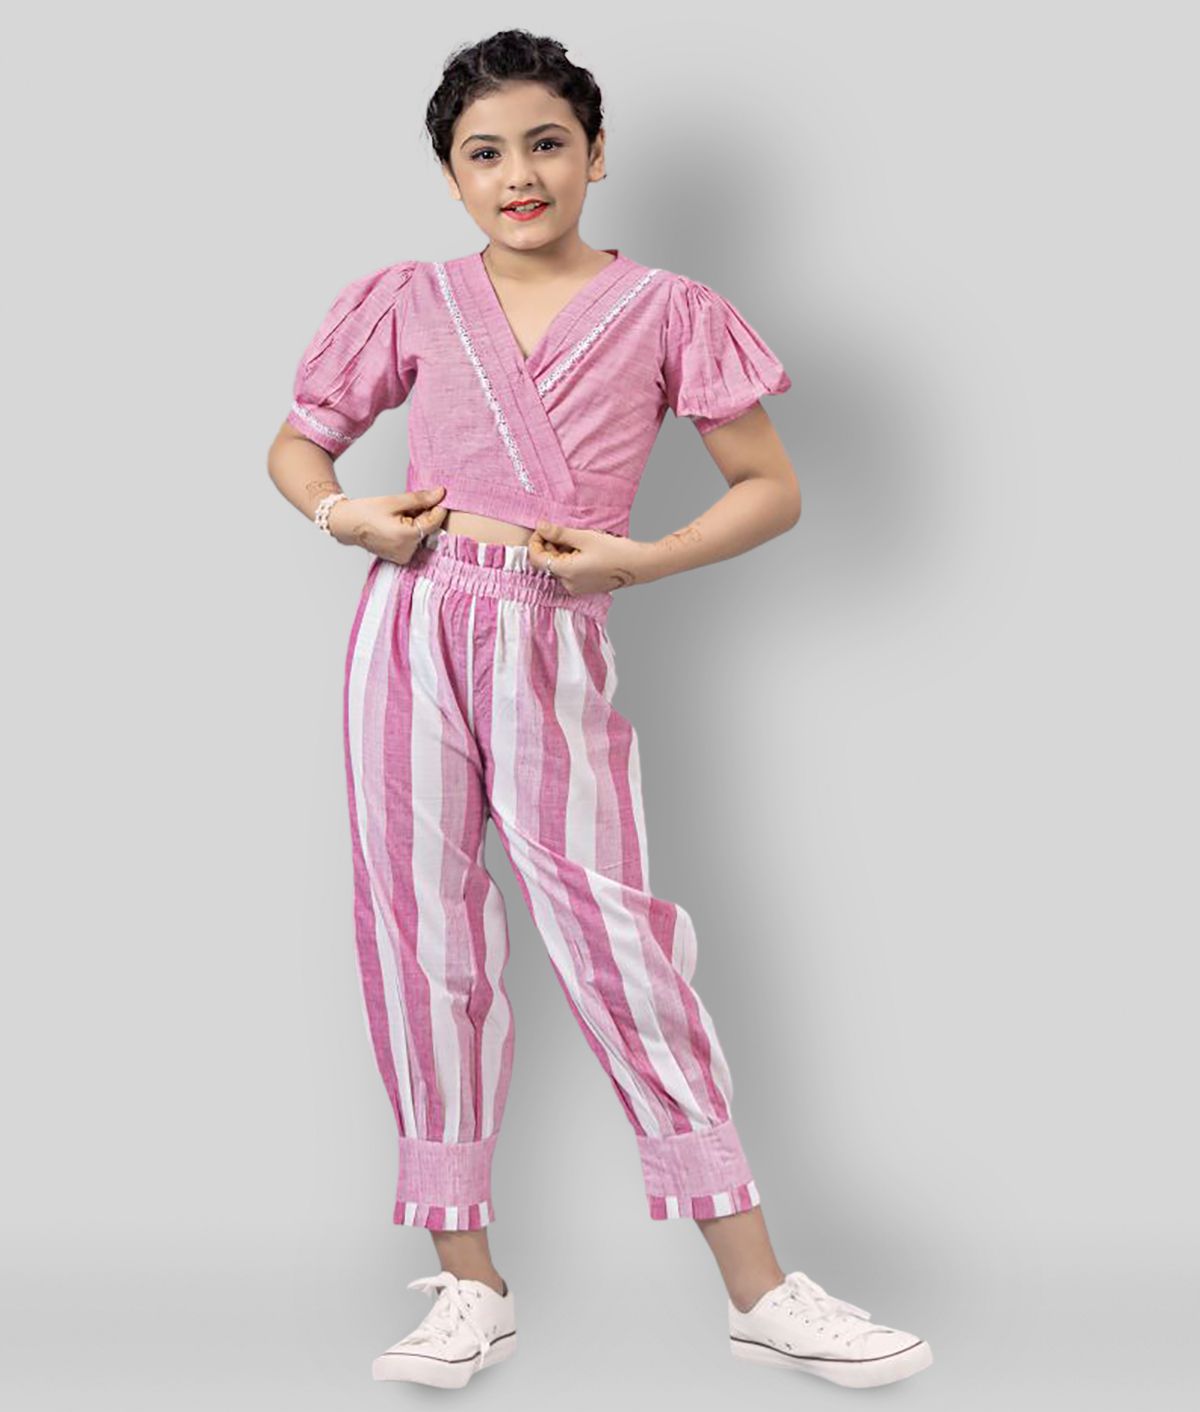     			Fashion Dream - Pink Cotton Blend Girl's Top With Pants ( Pack of 1 )